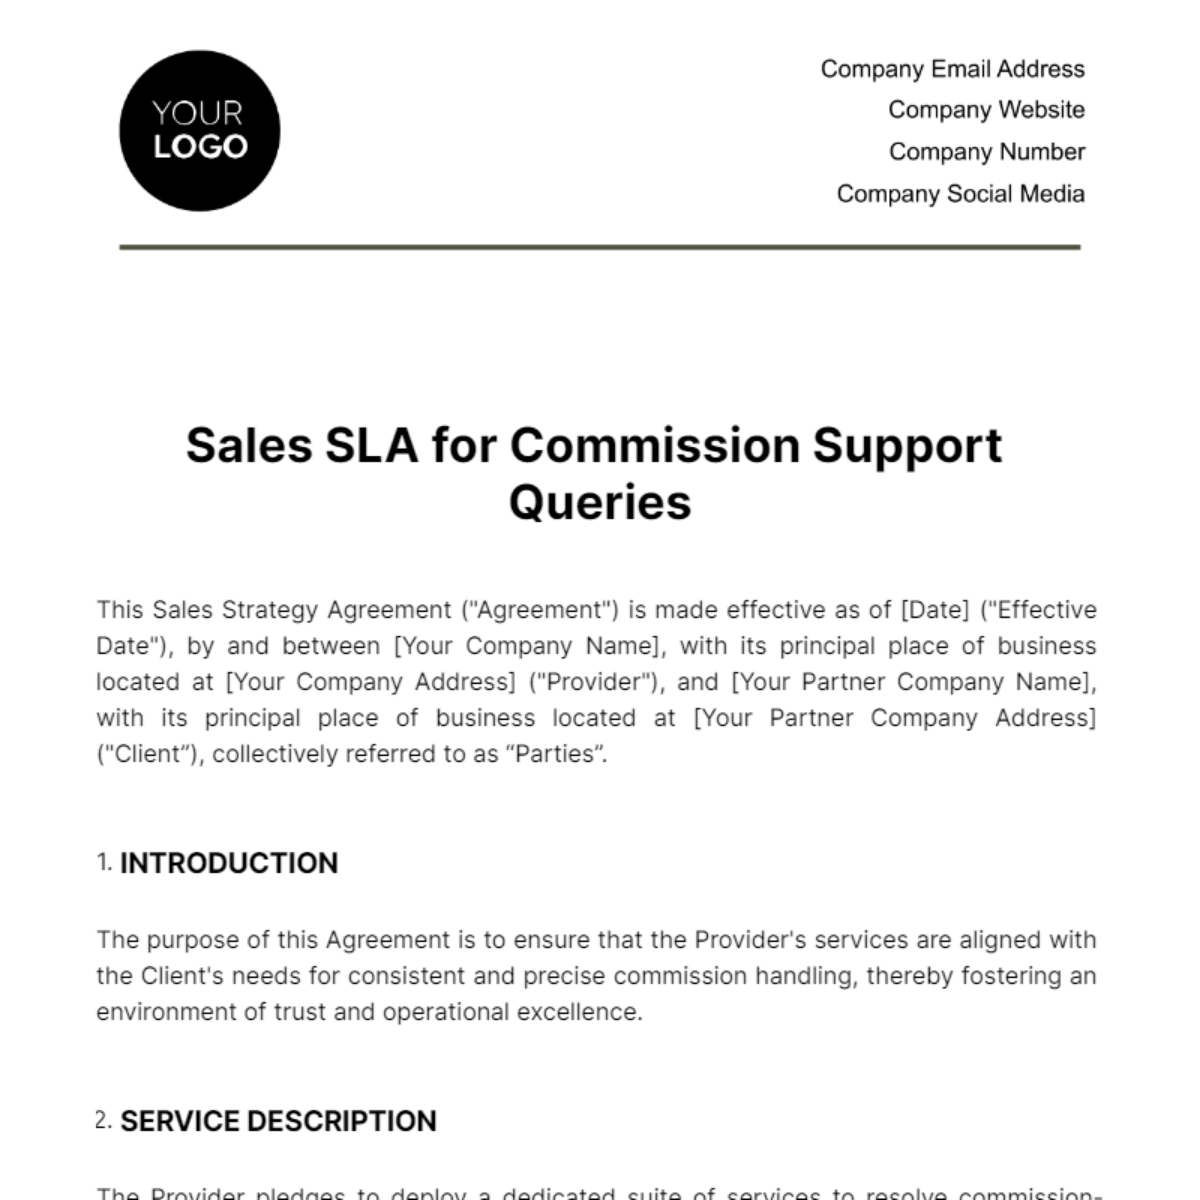 Free Sales SLA for Commission Support Queries Template